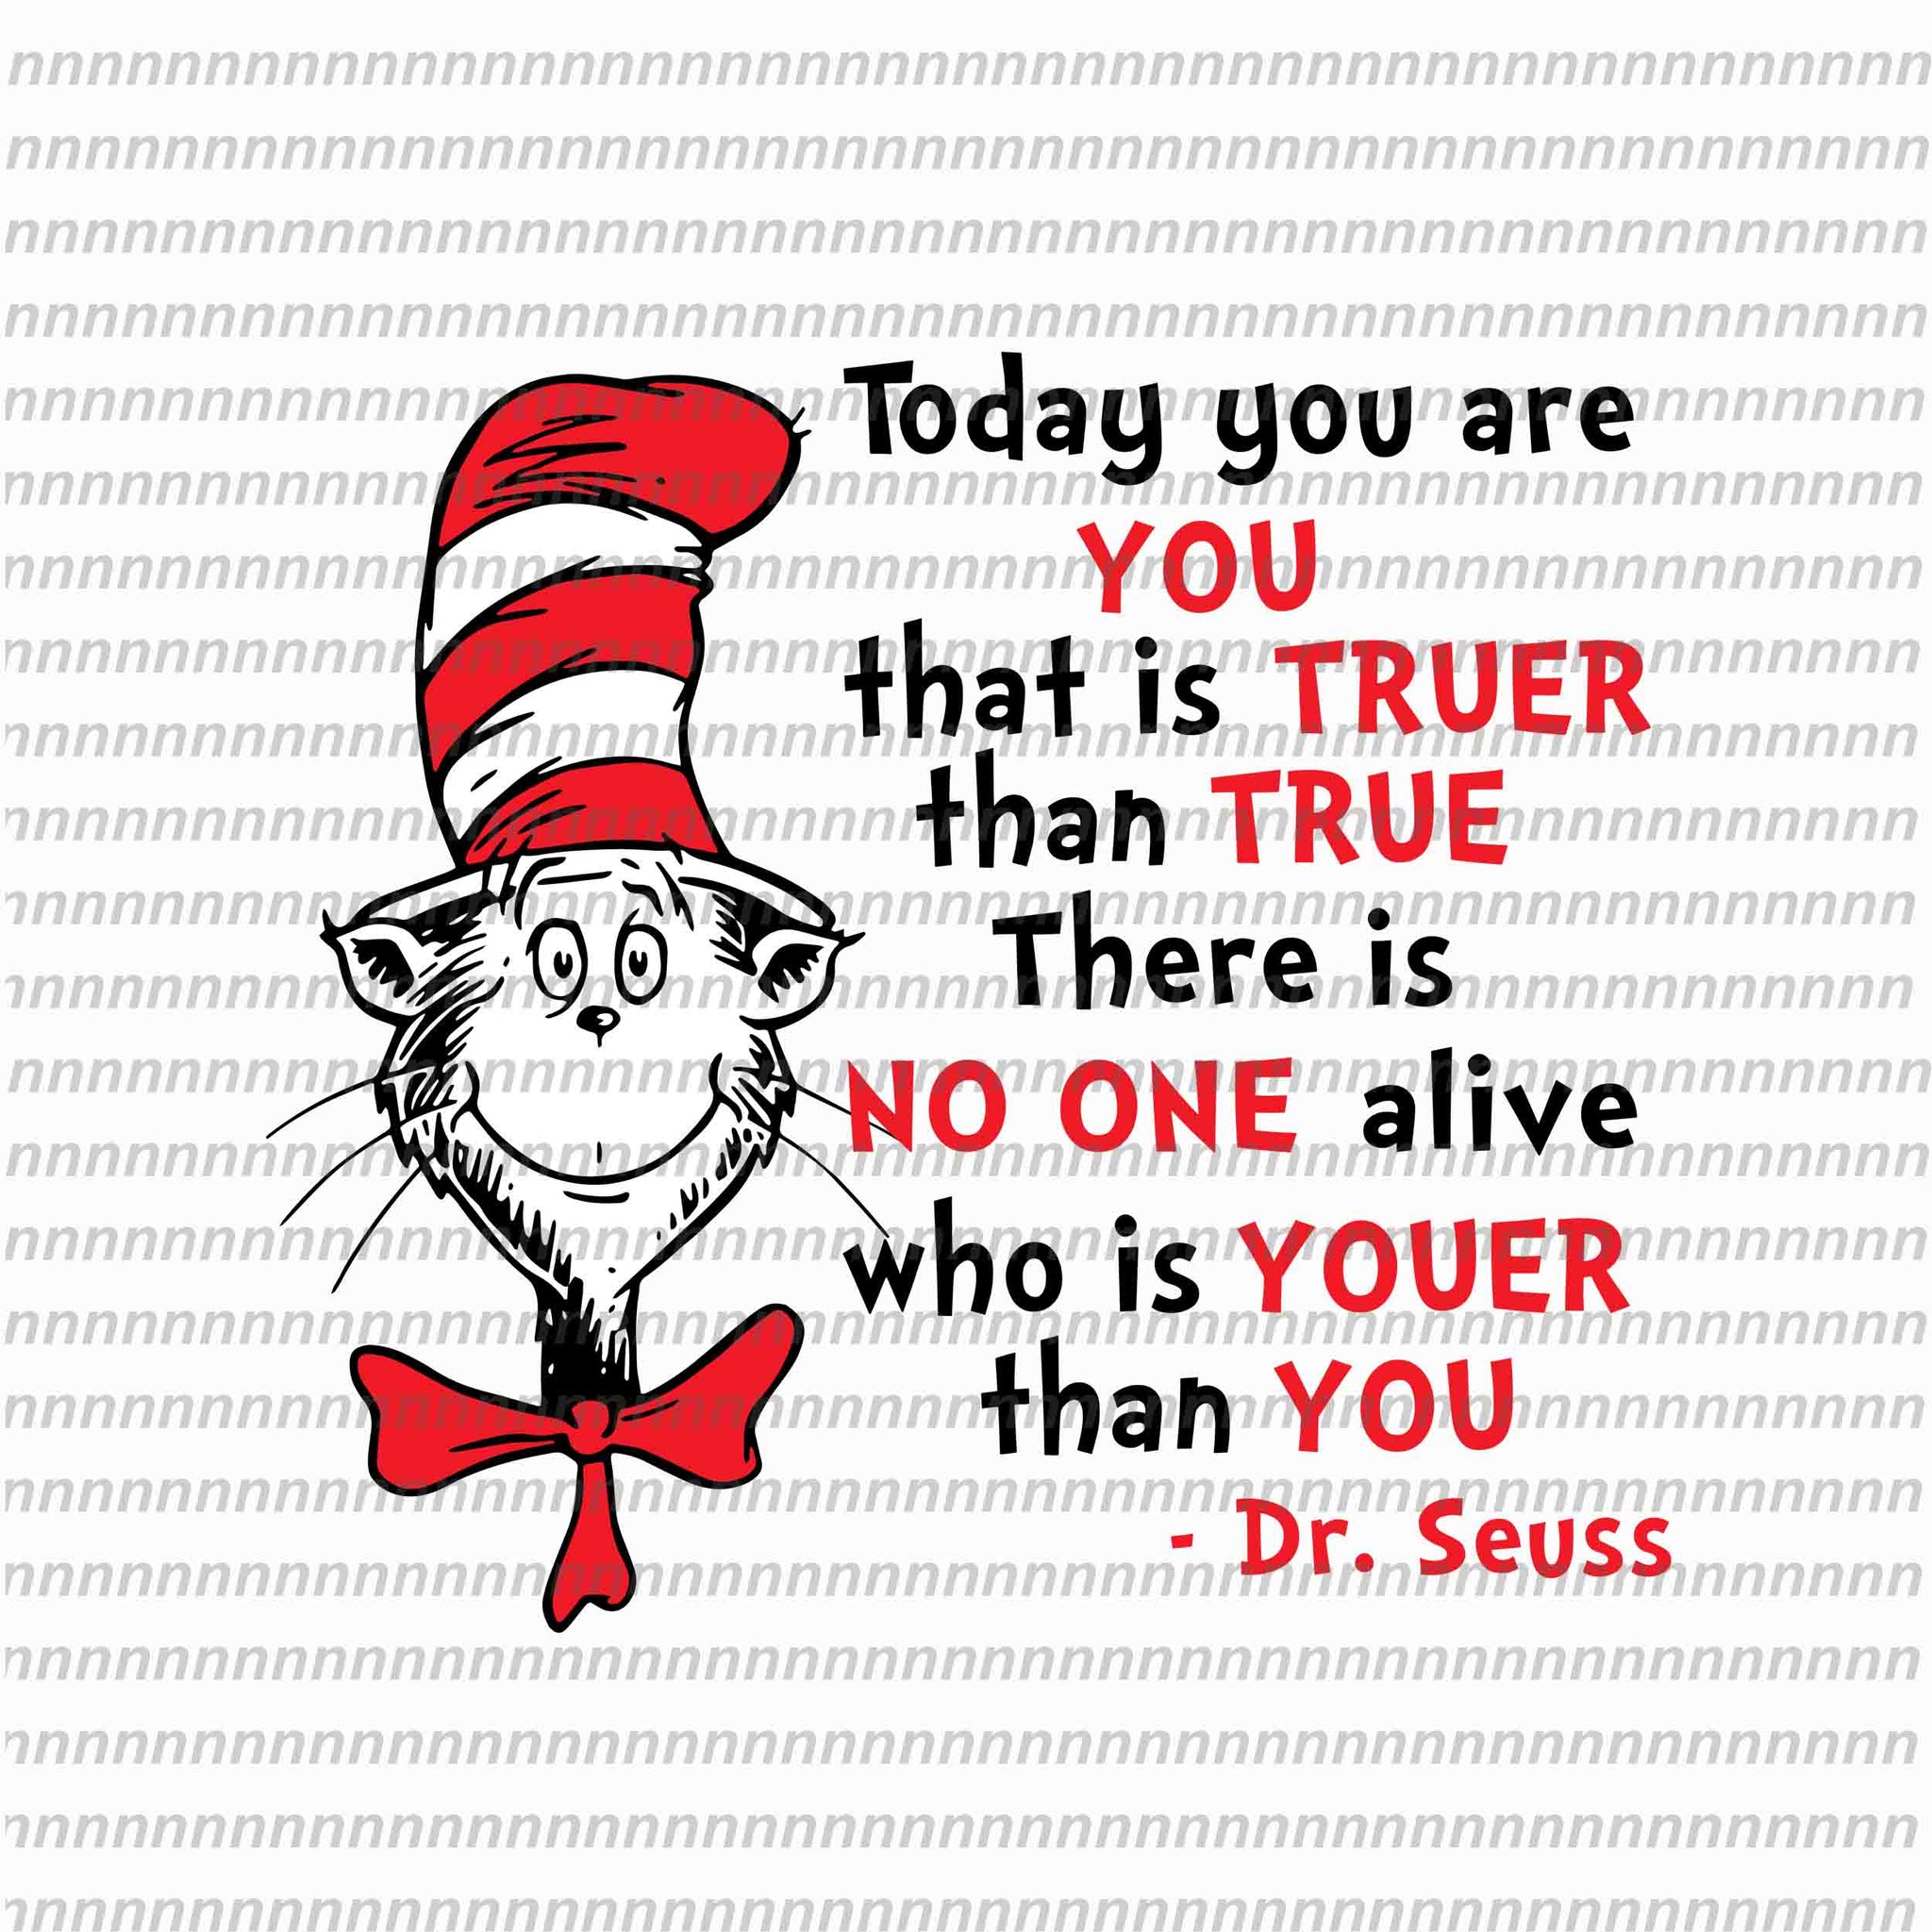 Today you are you that is truer than true, dr seuss svg,dr seuss vector, dr seuss quote, dr seuss design, Cat in the hat svg, thing 1 thing 2 thing 3, svg, png, dxf, eps file